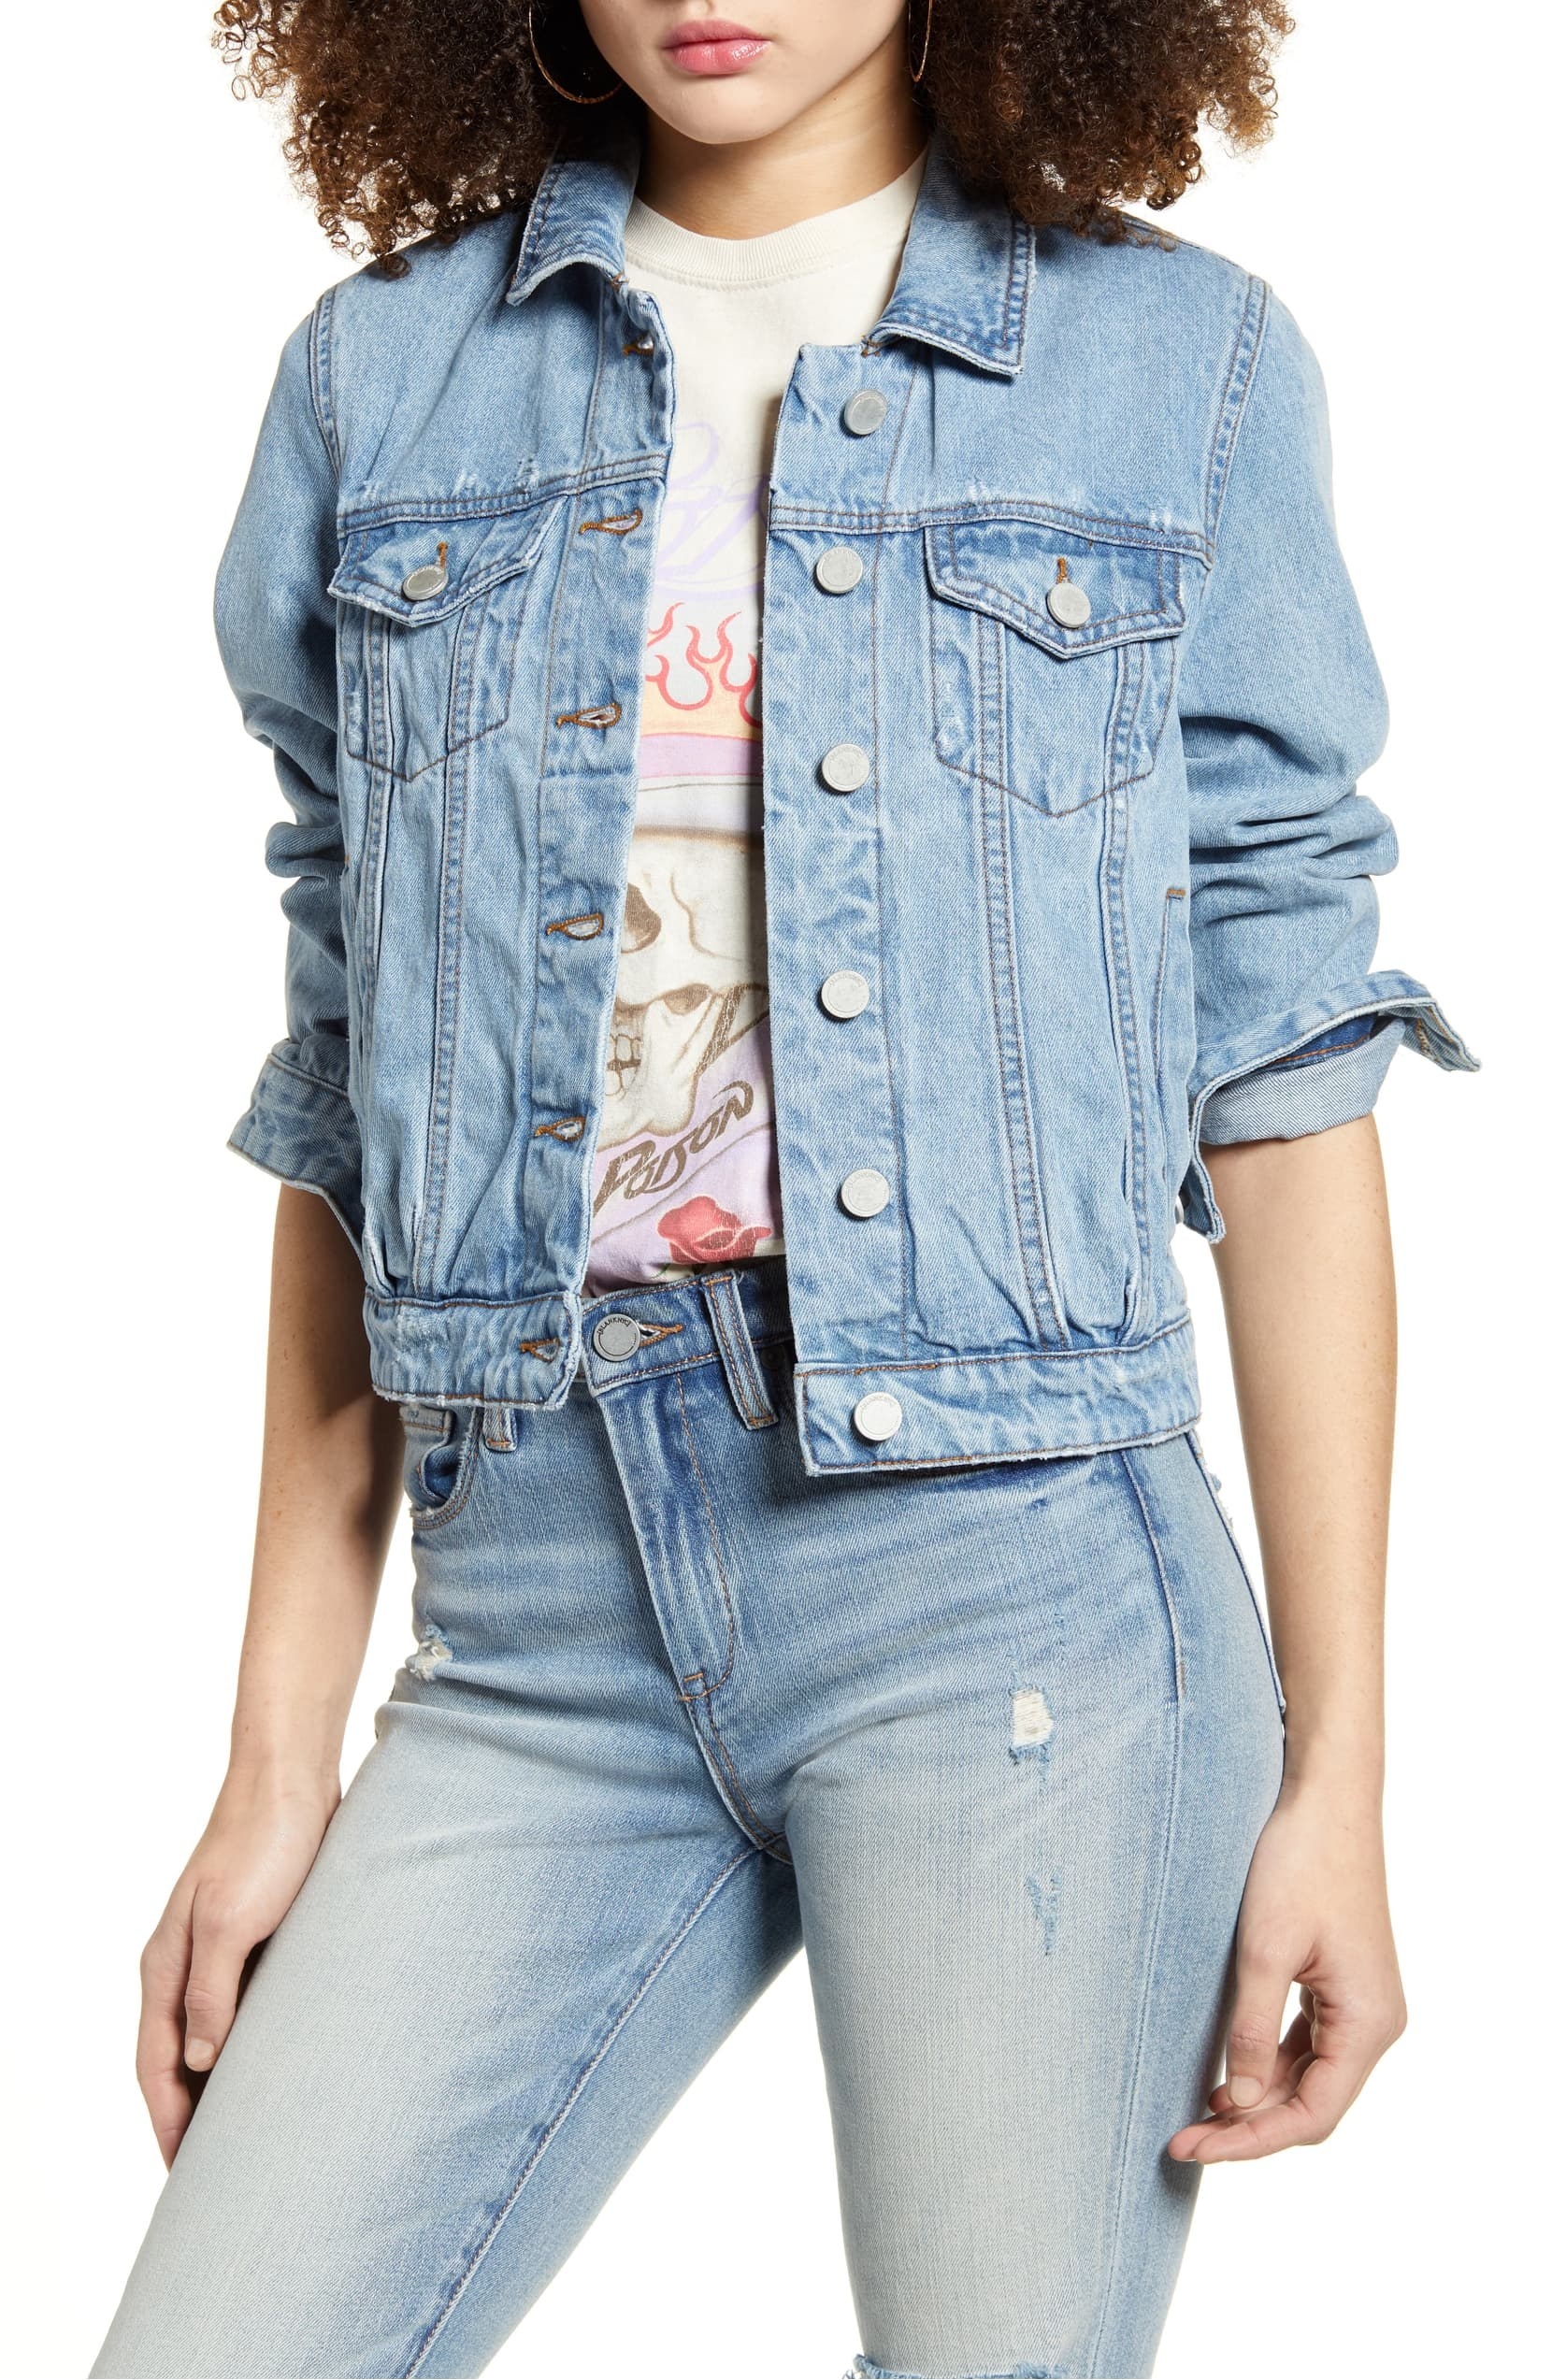 Model wearing BLANKNYC distressed denim jacket with jeans and a graphic tee